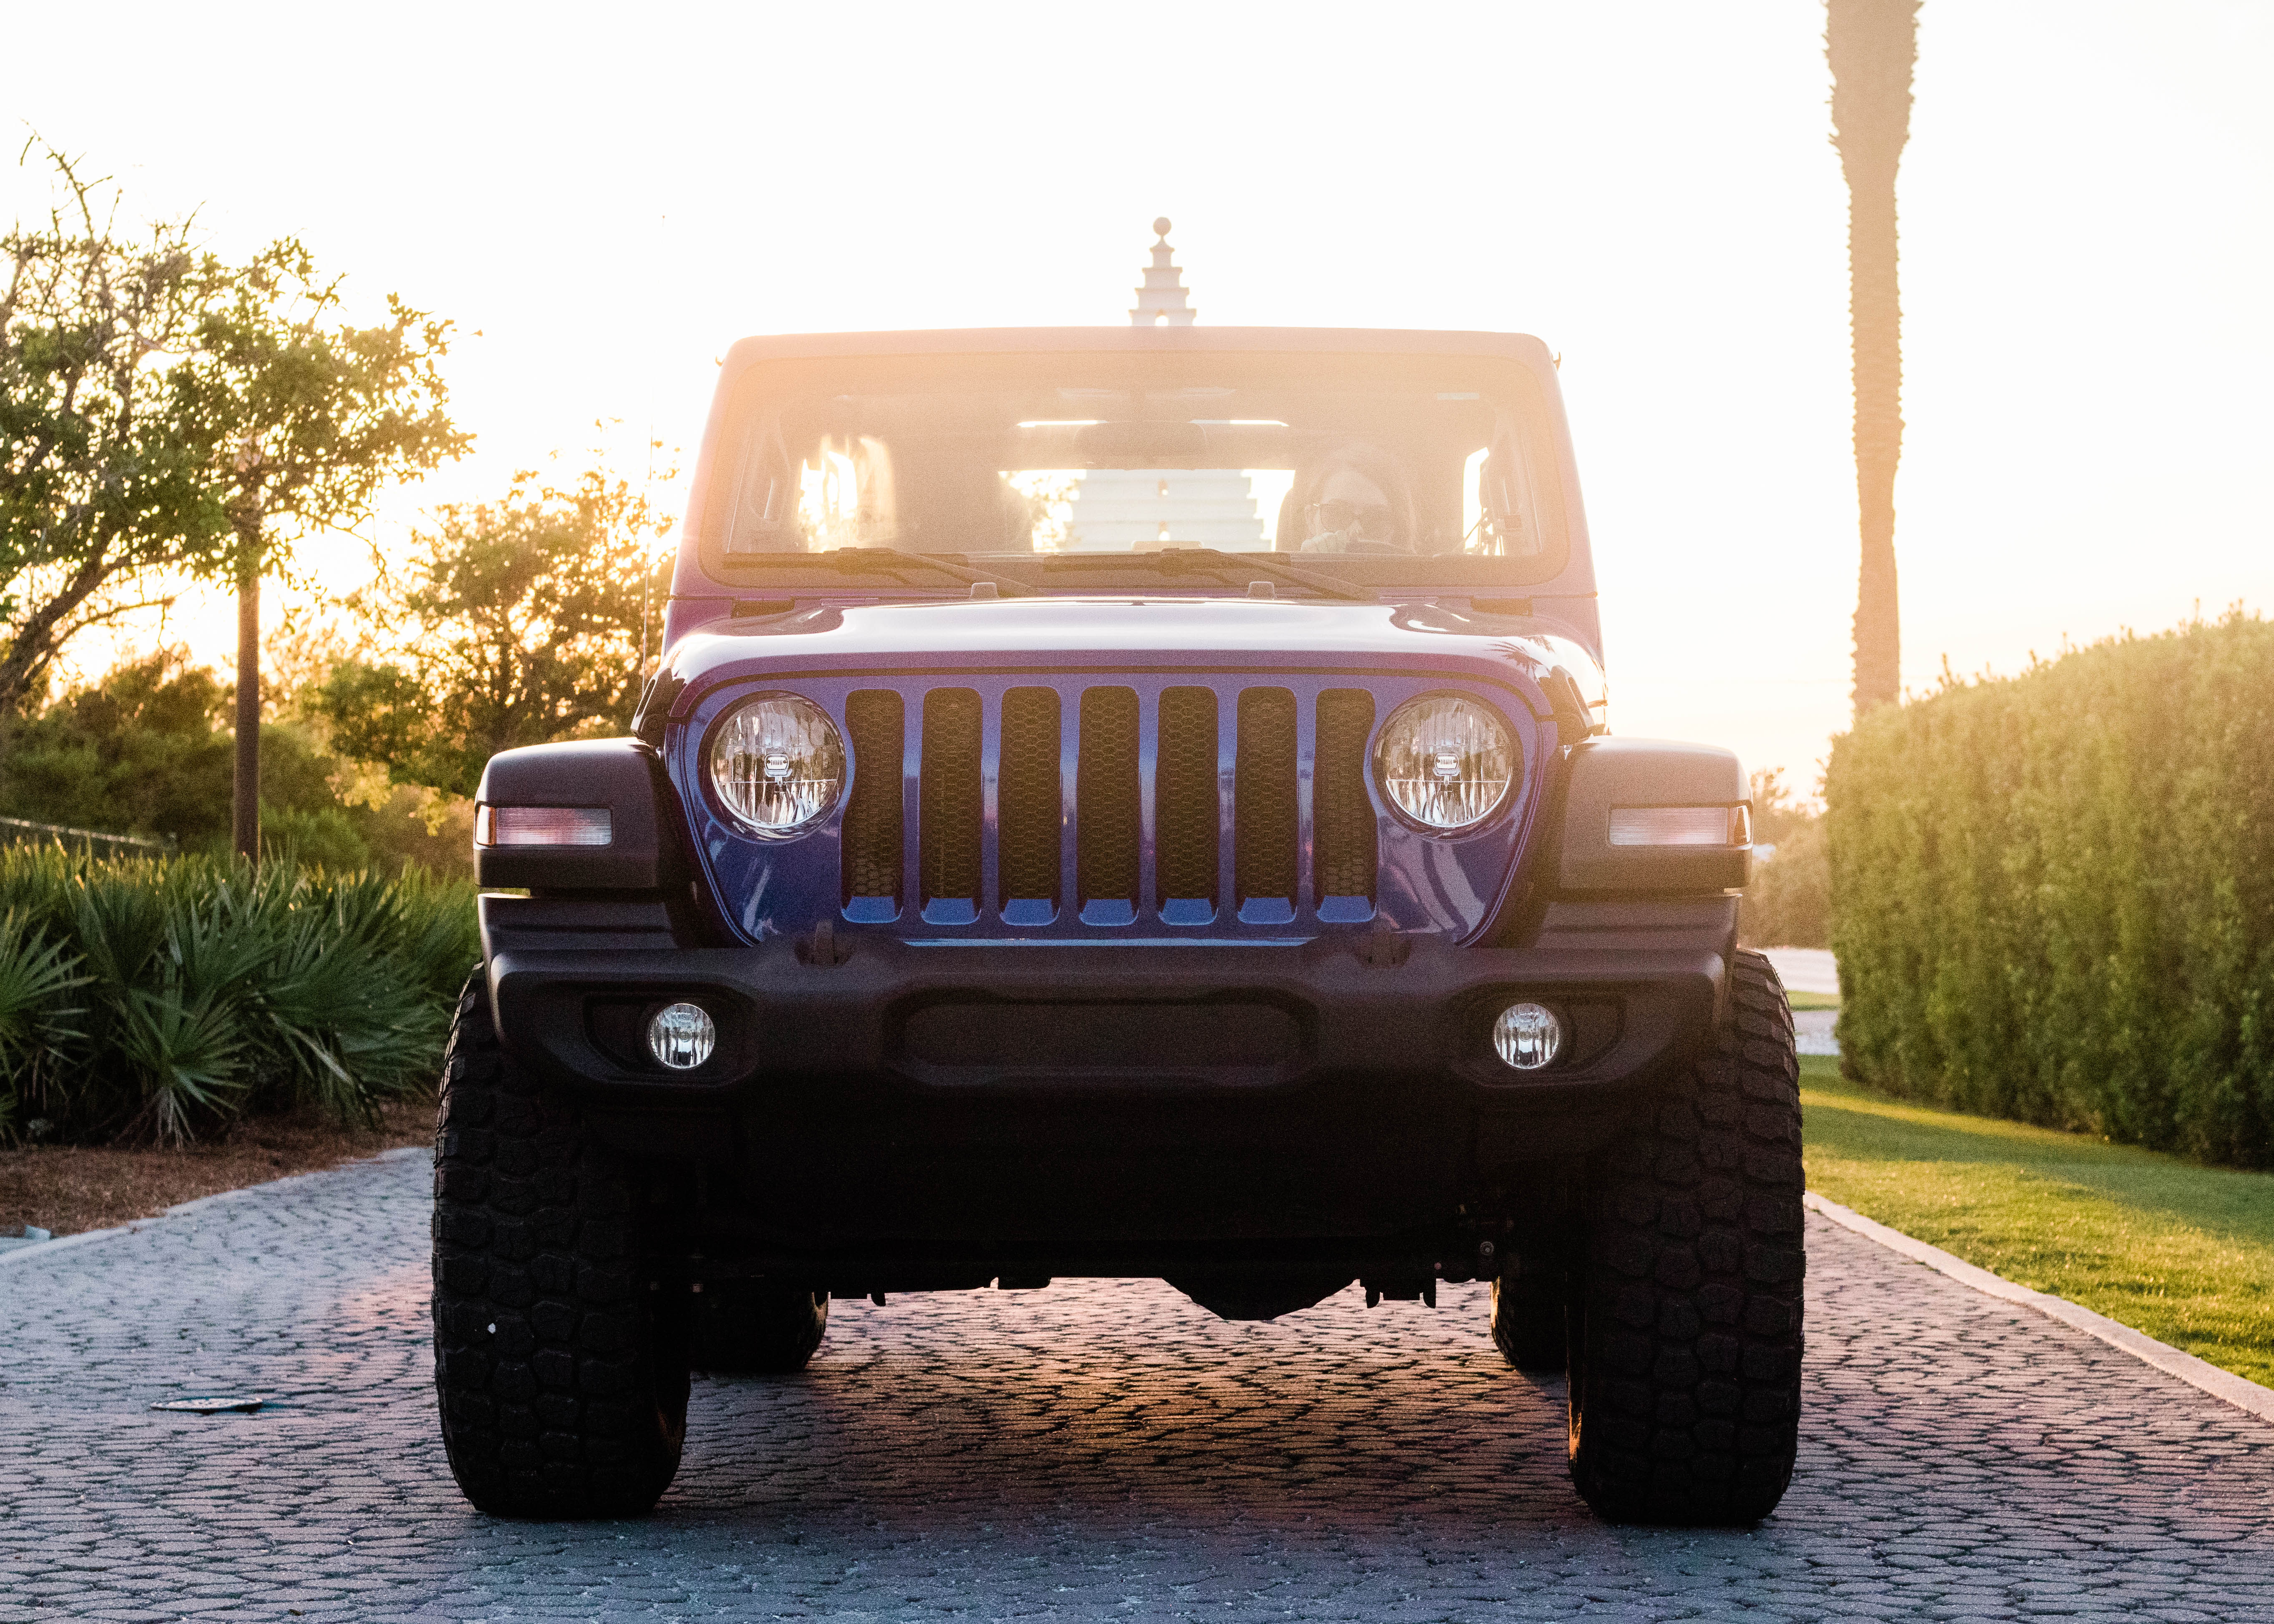 Destin Jeep Rentals - Find Things To Do In Destin Florida